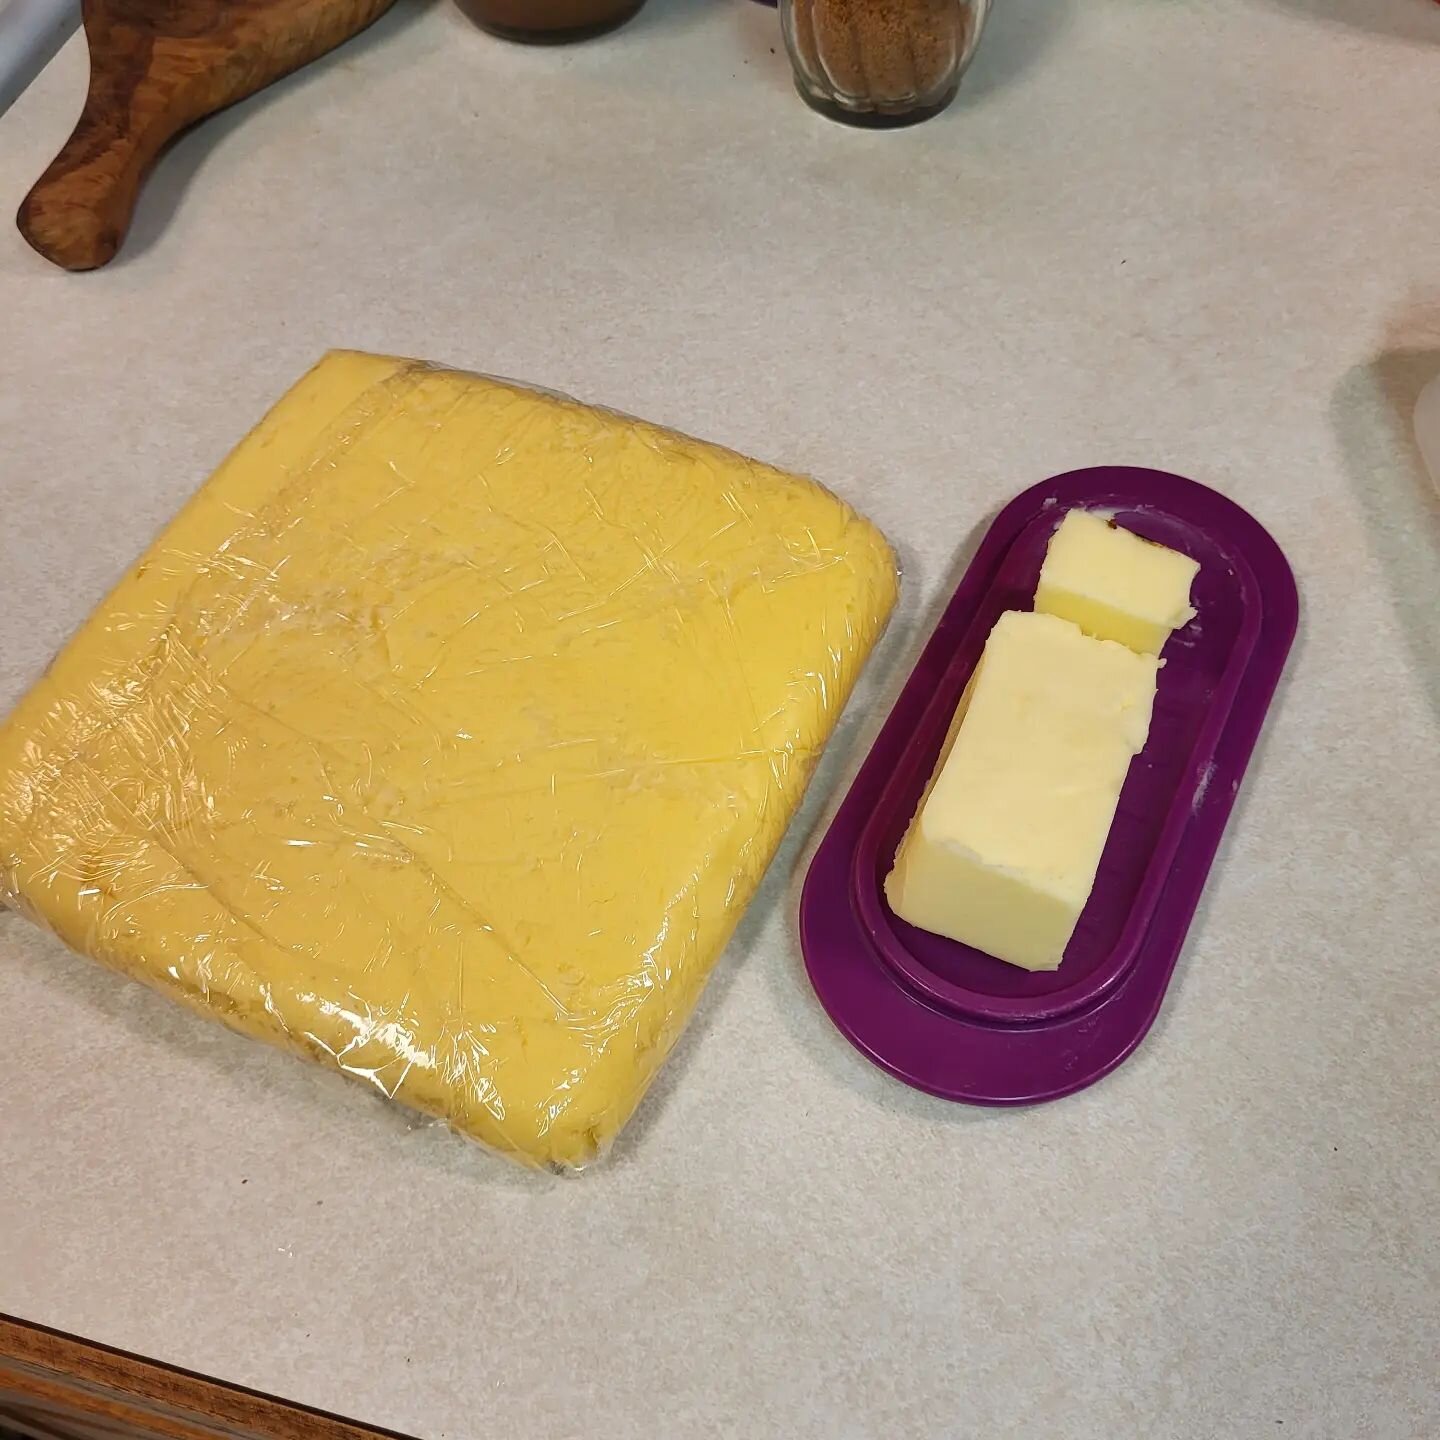 Made my first batch of butter today! In the blender no less! From start to finish, including the rinsing only took me 15 mins. I got 1.25 pounds!
Look at that color!! Store bought beside it for color difference.